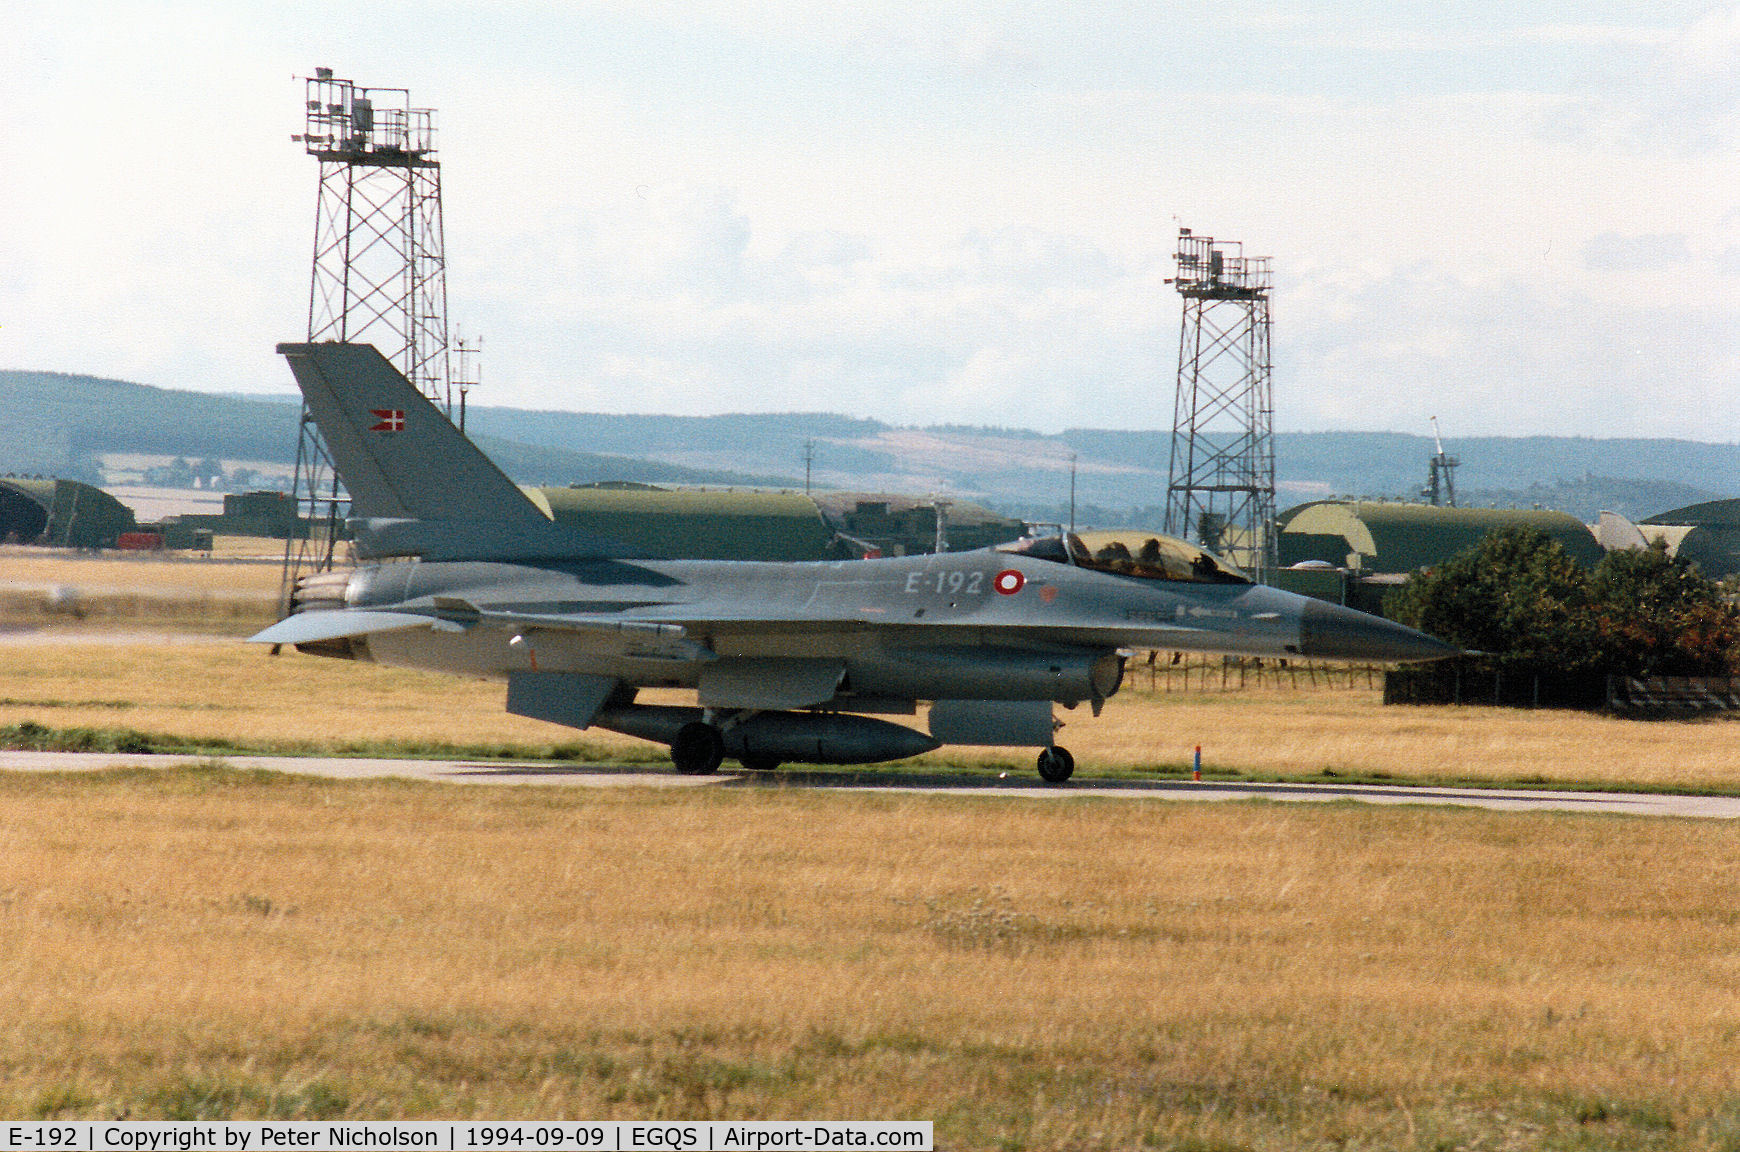 E-192, SABCA F-16AM Fighting Falcon C/N 6F-19, F-16A Falcon of Eskradille 730 Royal Danish Air Force based at Skrydstrup taxying to join Runway 23 at RAF Lossiemouth in September 1994.